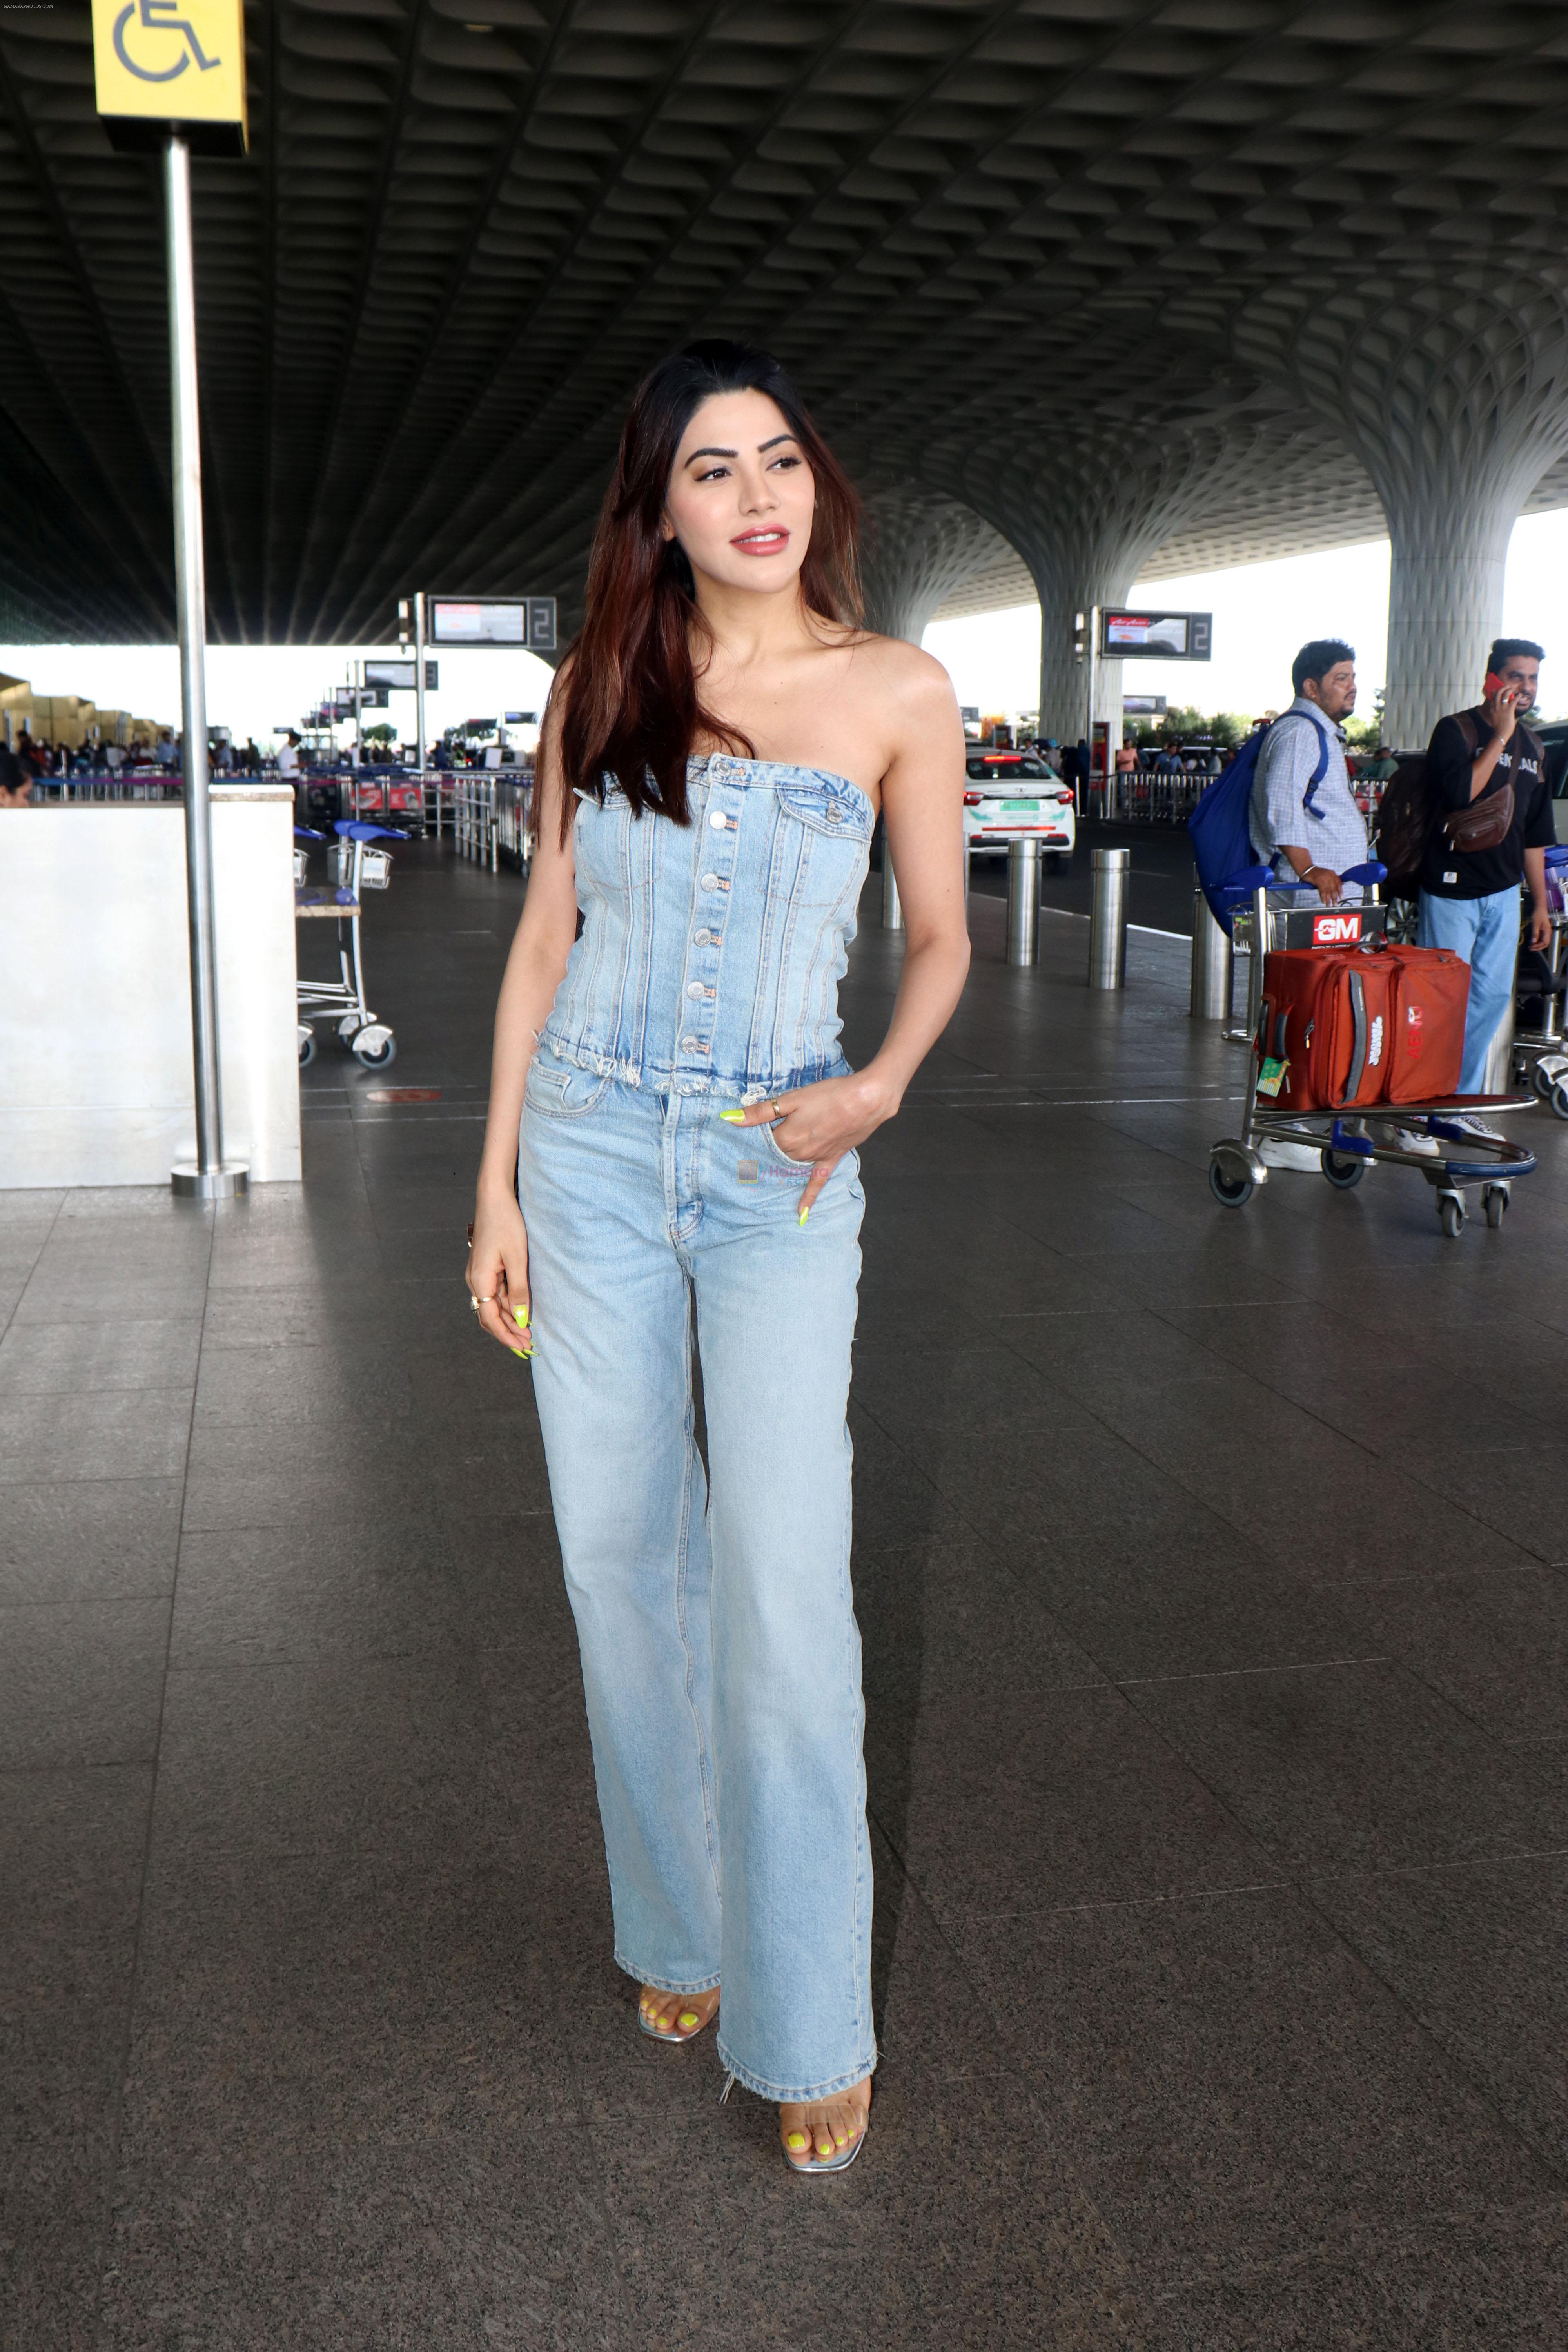 Nikki Tamboli dressed in Jeans top and pant holding Gucci Ophidia Small handbag